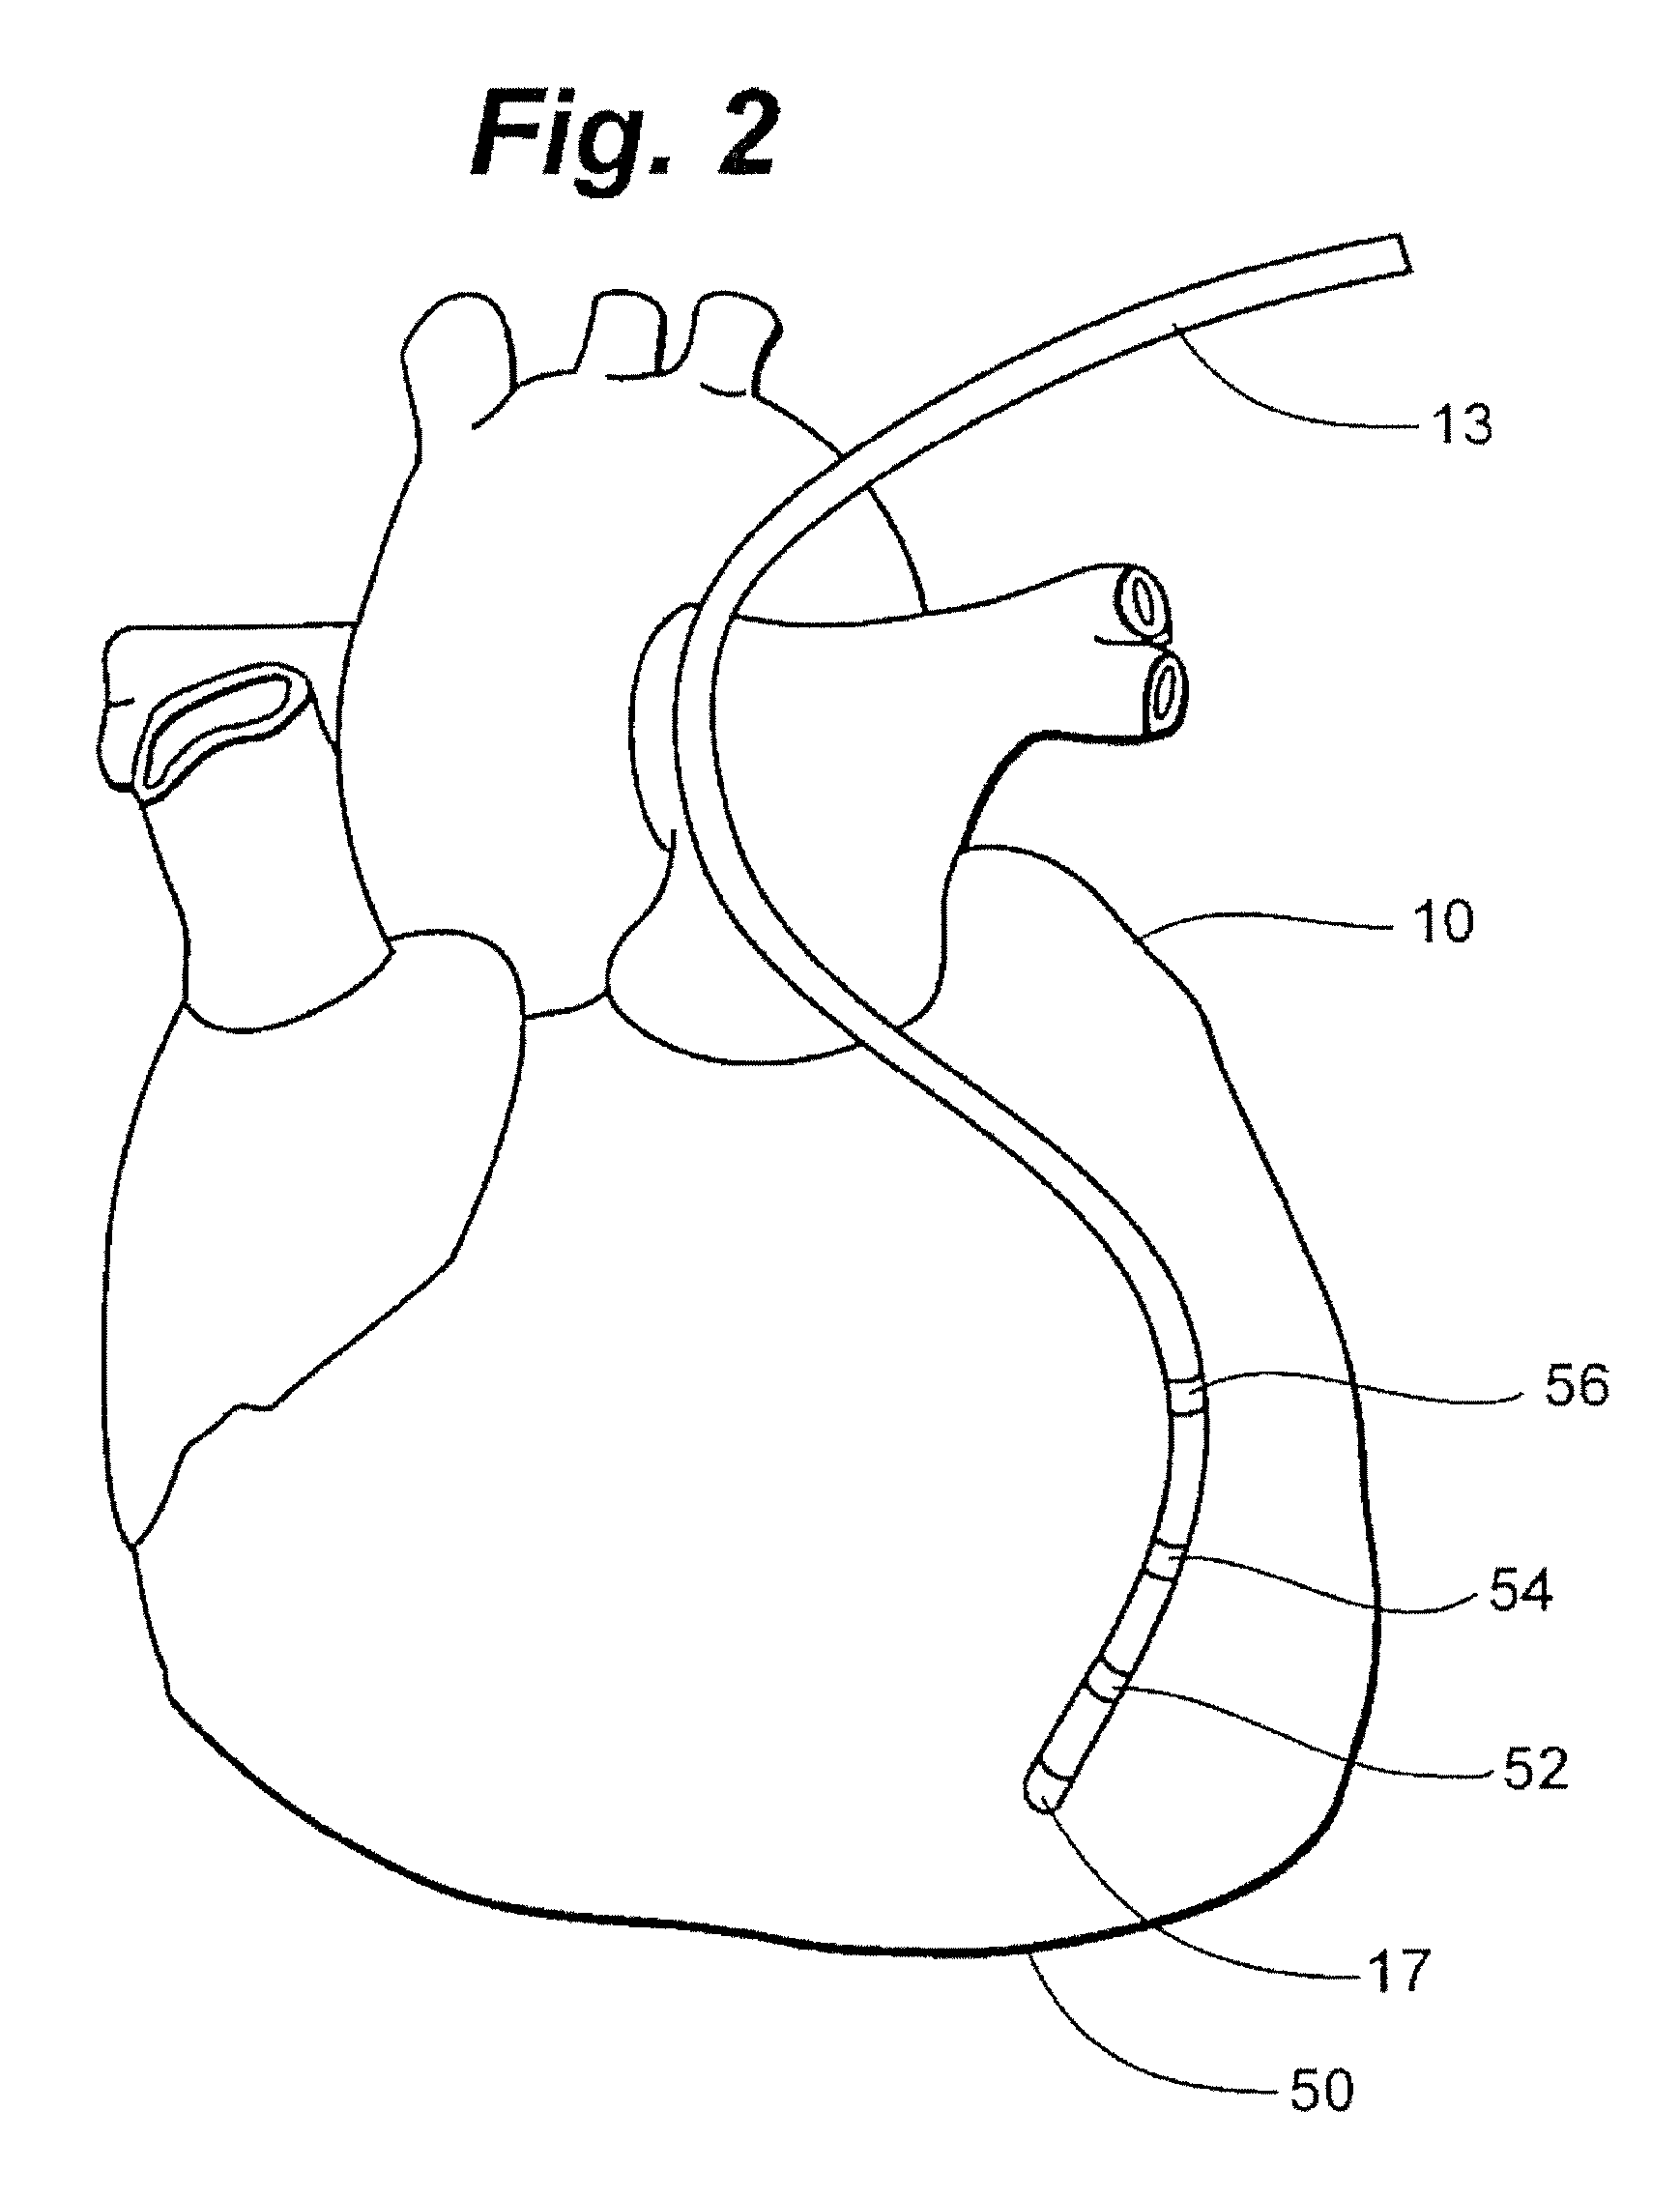 System and method for three-dimensional mapping of electrophysiology information